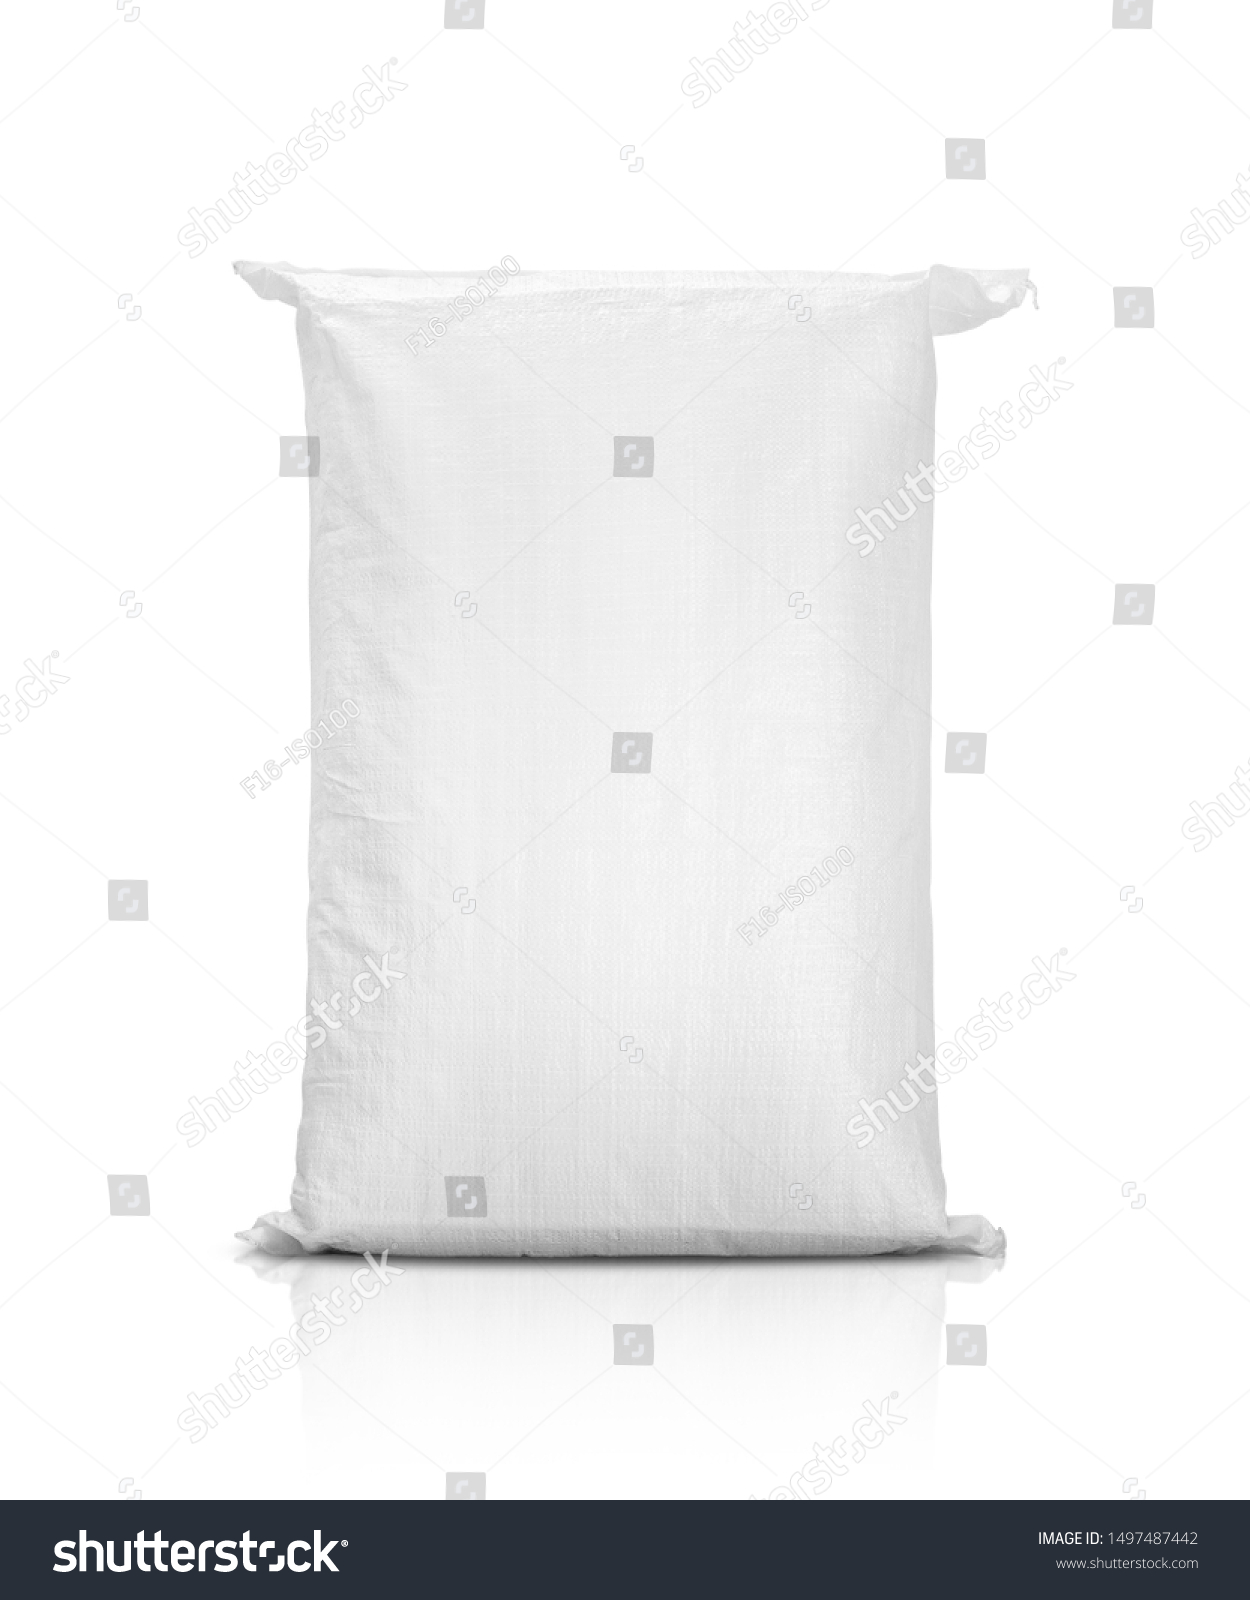 sand bag or white plastic canvas sack for rice or agriculture product isolated on white background #1497487442